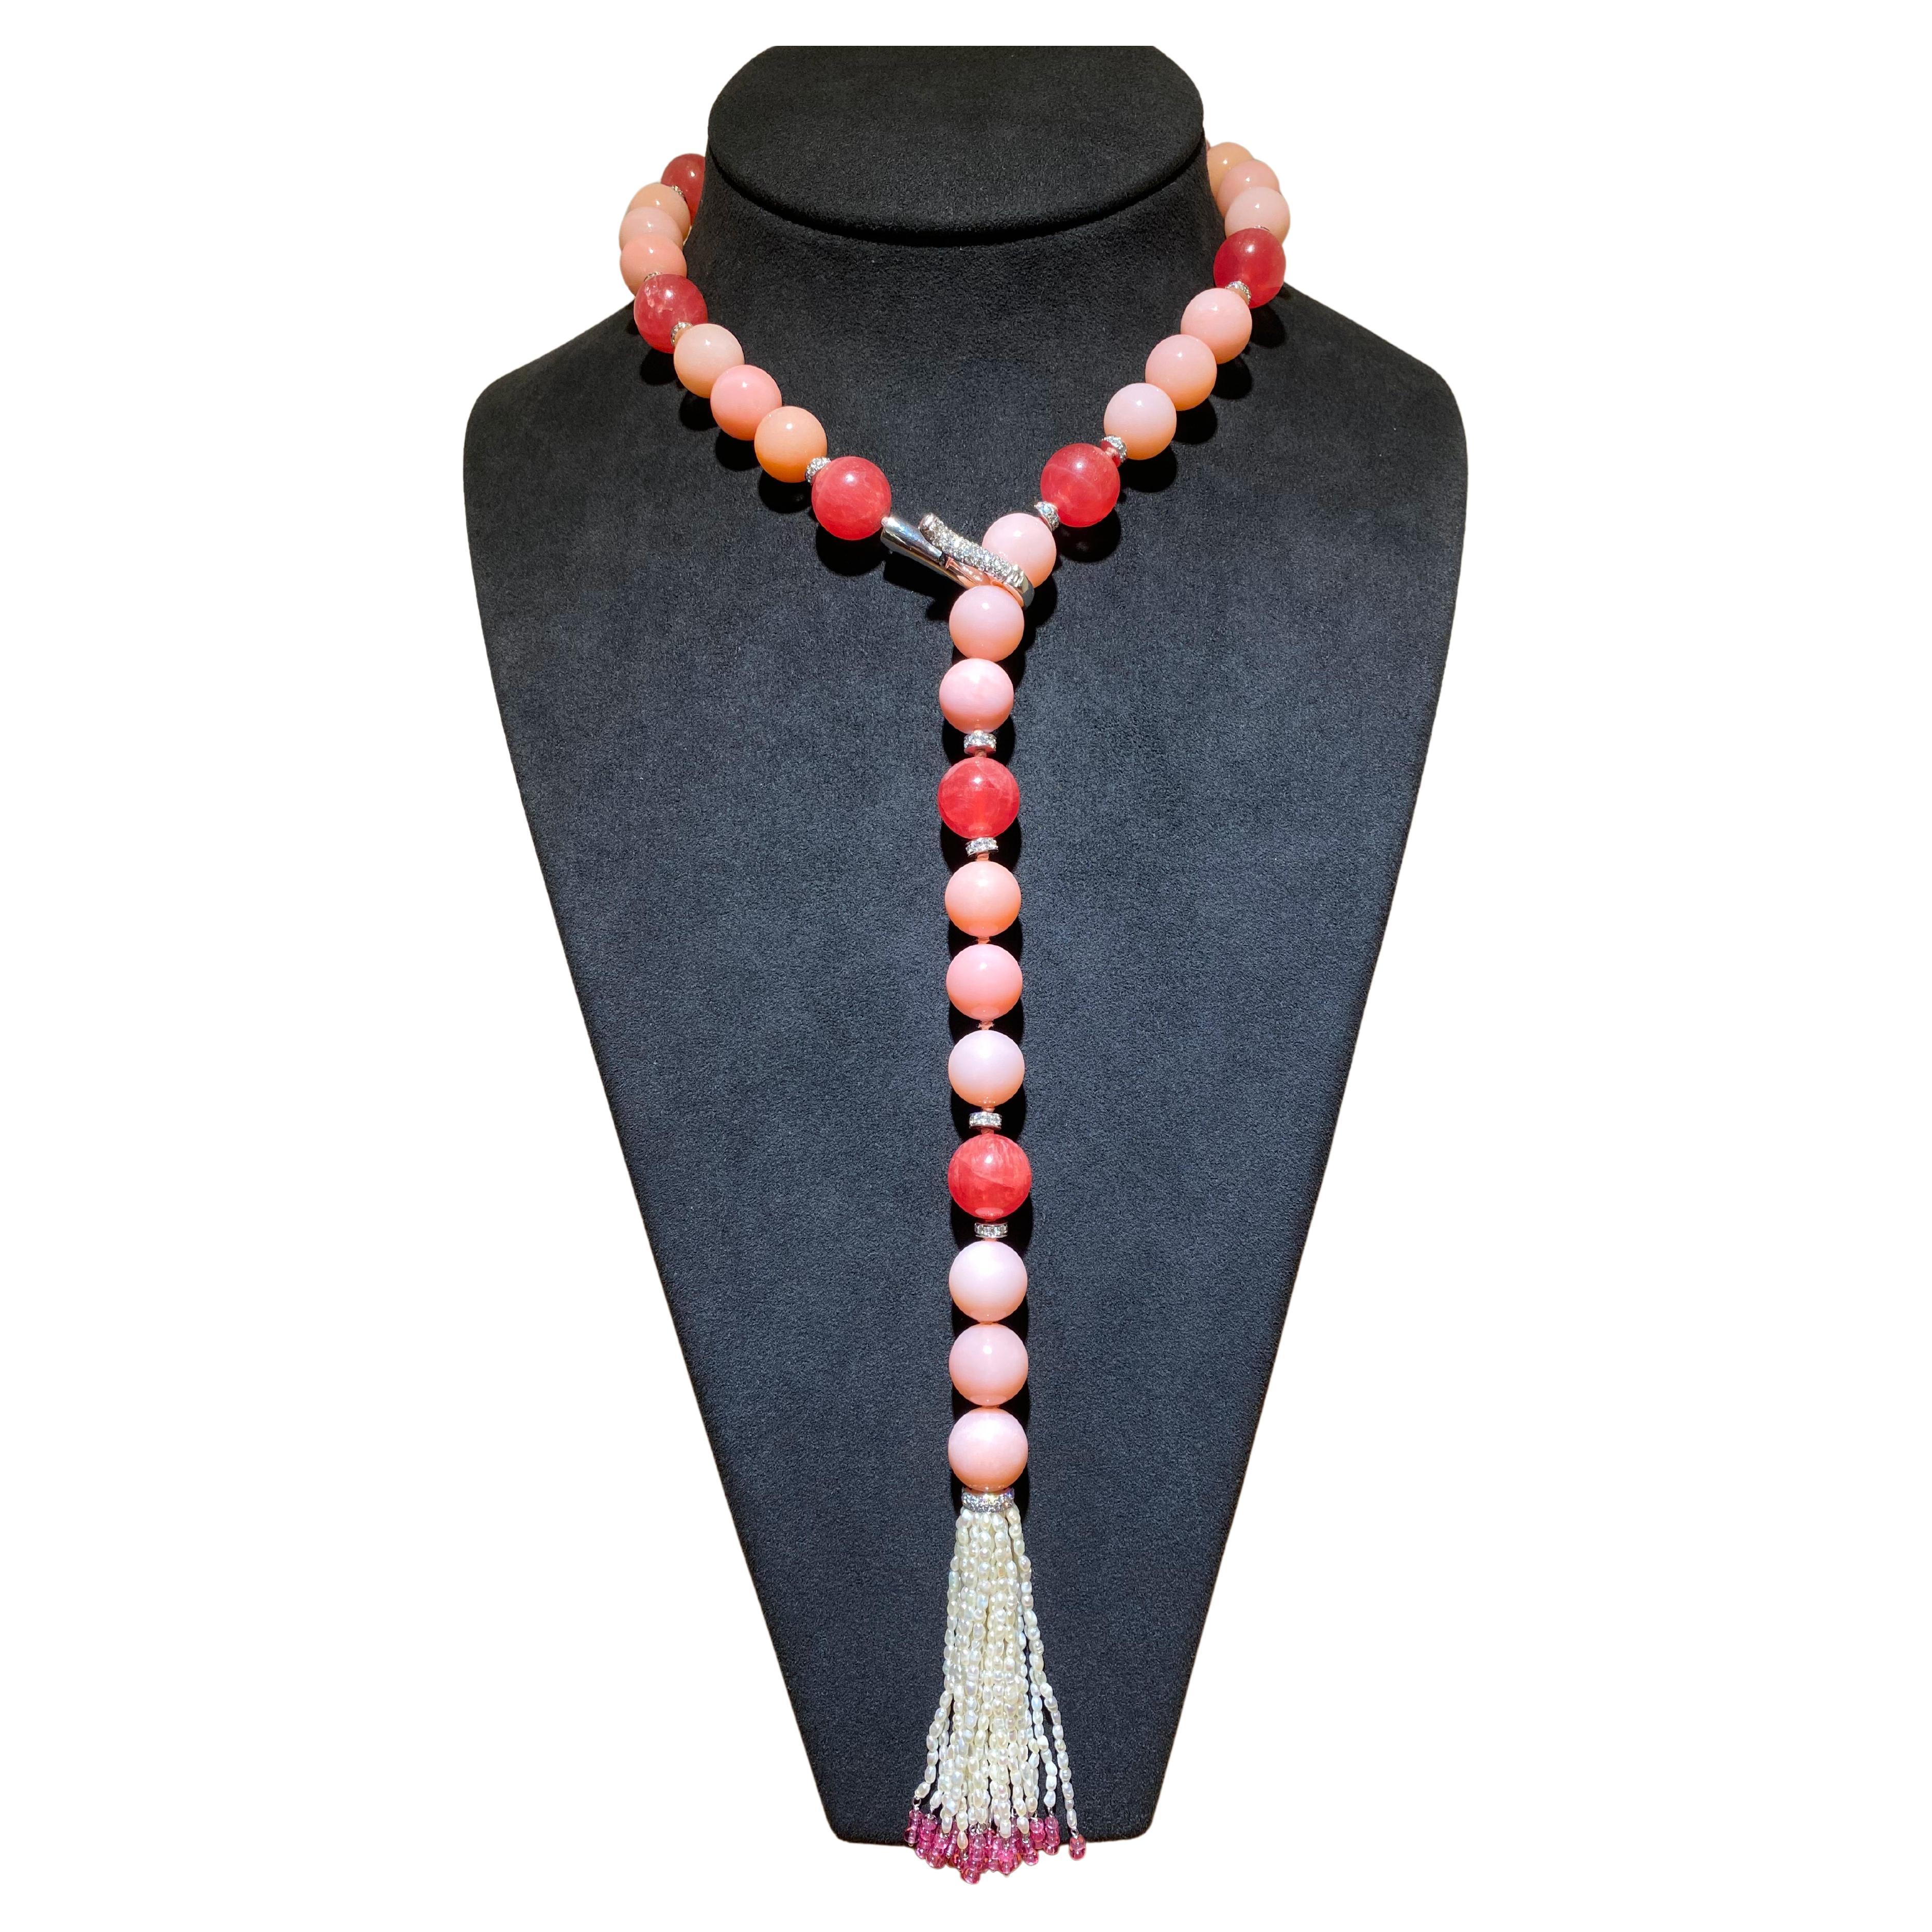 SCAVIA Pink Opal/Rhodochrosite Spheres Spinel And Small Pearls Tuft